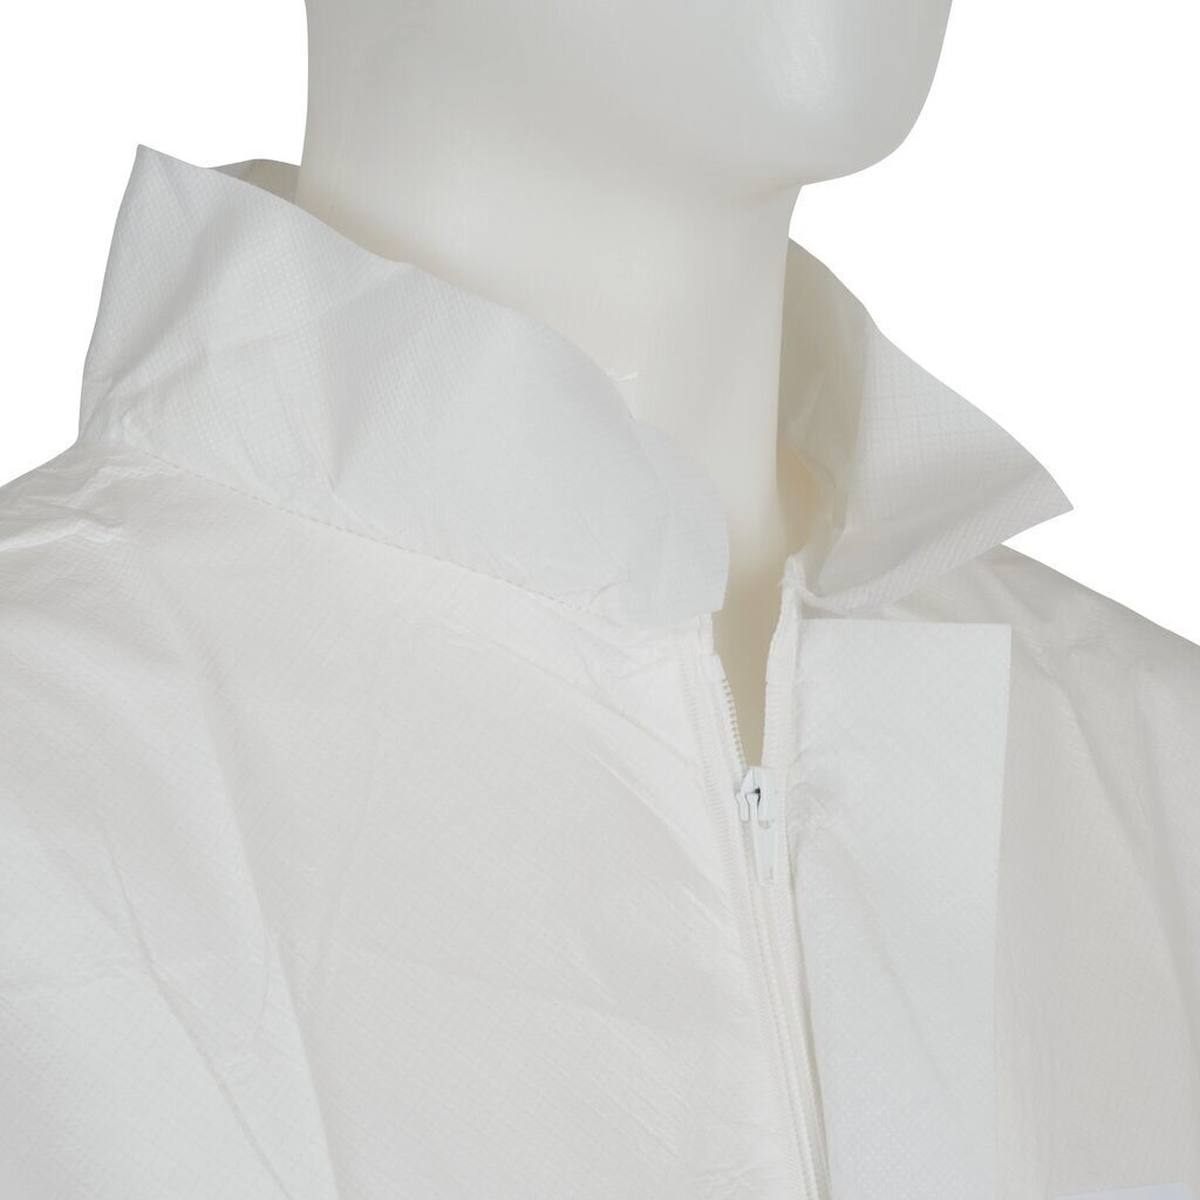 3M 4440 coat, white, size S, especially breathable, very light, with zipper, knitted cuffs